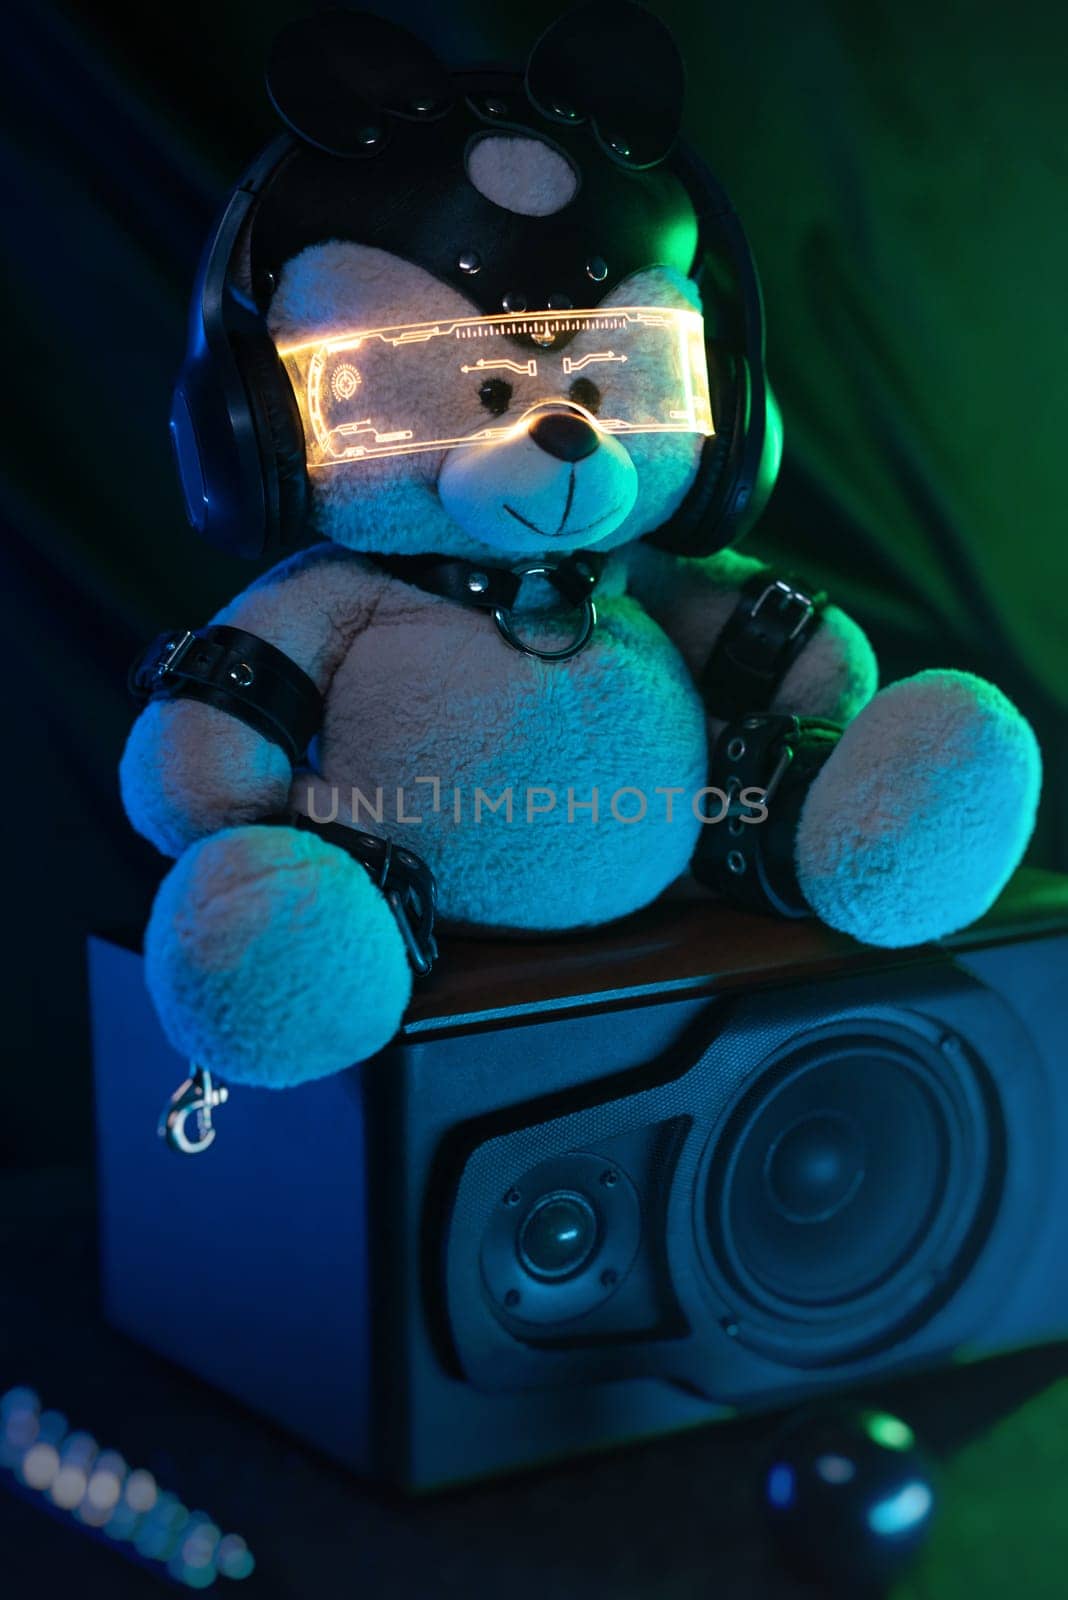 a toy bear dressed in leather BDSM belts, headphones and glowing glasses in neon light listens to music. dark background by Rotozey